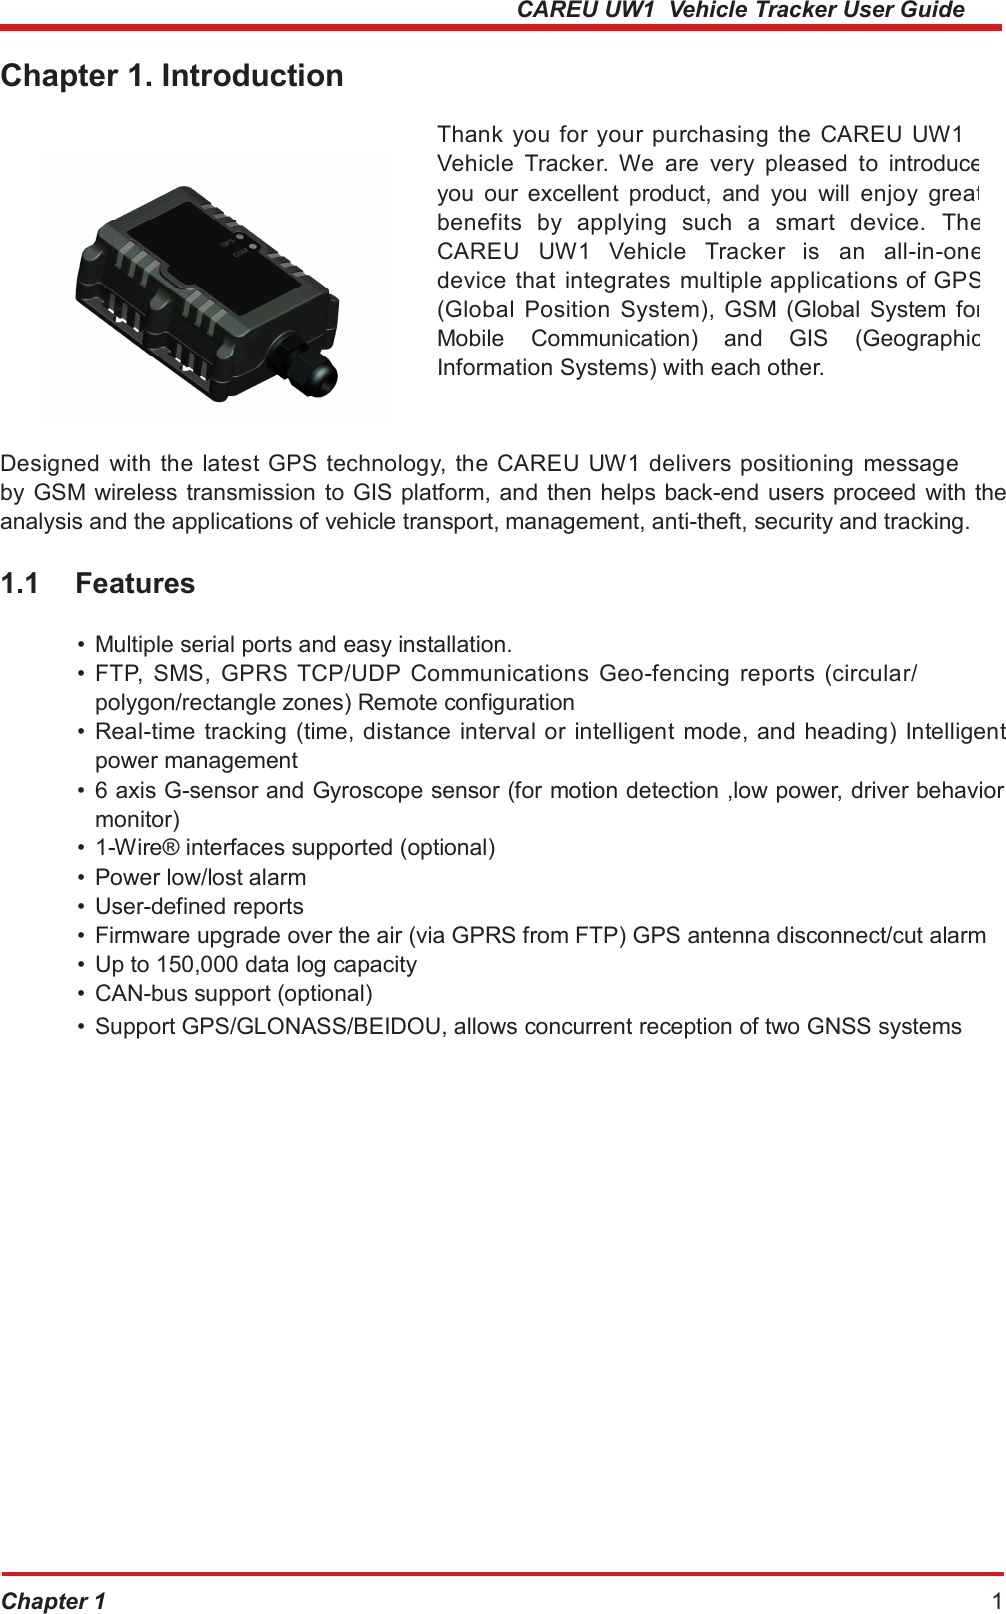  CAREU UW1  Vehicle Tracker User Guide Chapter 1. Introduction Thank you for your purchasing the CAREU UW1 Vehicle  Tracker.  We  are  very  pleased  to  introduce you  our  excellent  product,  and  you  will  enjoy  great benefits  by  applying  such  a  smart  device.  TheCAREU  UW1  Vehicle  Tracker  is  an  all-in-onedevice  that  integrates  multiple applications of GPS (Global  Position  System),  GSM  (Global  System forMobile  Communication)  and  GIS  (Geographic Information Systems) with each other. Designed with the latest GPS technology, the CAREU UW1 delivers positioning message by GSM wireless transmission  to GIS platform, and then helps back-end users proceed with the analysis and the applications of vehicle transport, management, anti-theft, security and tracking. 1.1 Features • Multiple serial ports and easy installation. •  FTP,  SMS,  GPRS  TCP/UDP  Communications  Geo-fencing  reports  (circular/ polygon/rectangle zones) Remote configuration •  Real-time tracking (time, distance  interval or intelligent mode, and heading) Intelligent power management •  6 axis G-sensor and Gyroscope sensor (for motion detection ,low power, driver behavior monitor) •  1-Wire® interfaces supported (optional) •  Power low/lost alarm •  User-defined reports •  Firmware upgrade over the air (via GPRS from FTP) GPS antenna disconnect/cut alarm •  Up to 150,000 data log capacity •  CAN-bus support (optional) •  Support GPS/GLONASS/BEIDOU, allows concurrent reception of two GNSS systems Chapter 1 1 